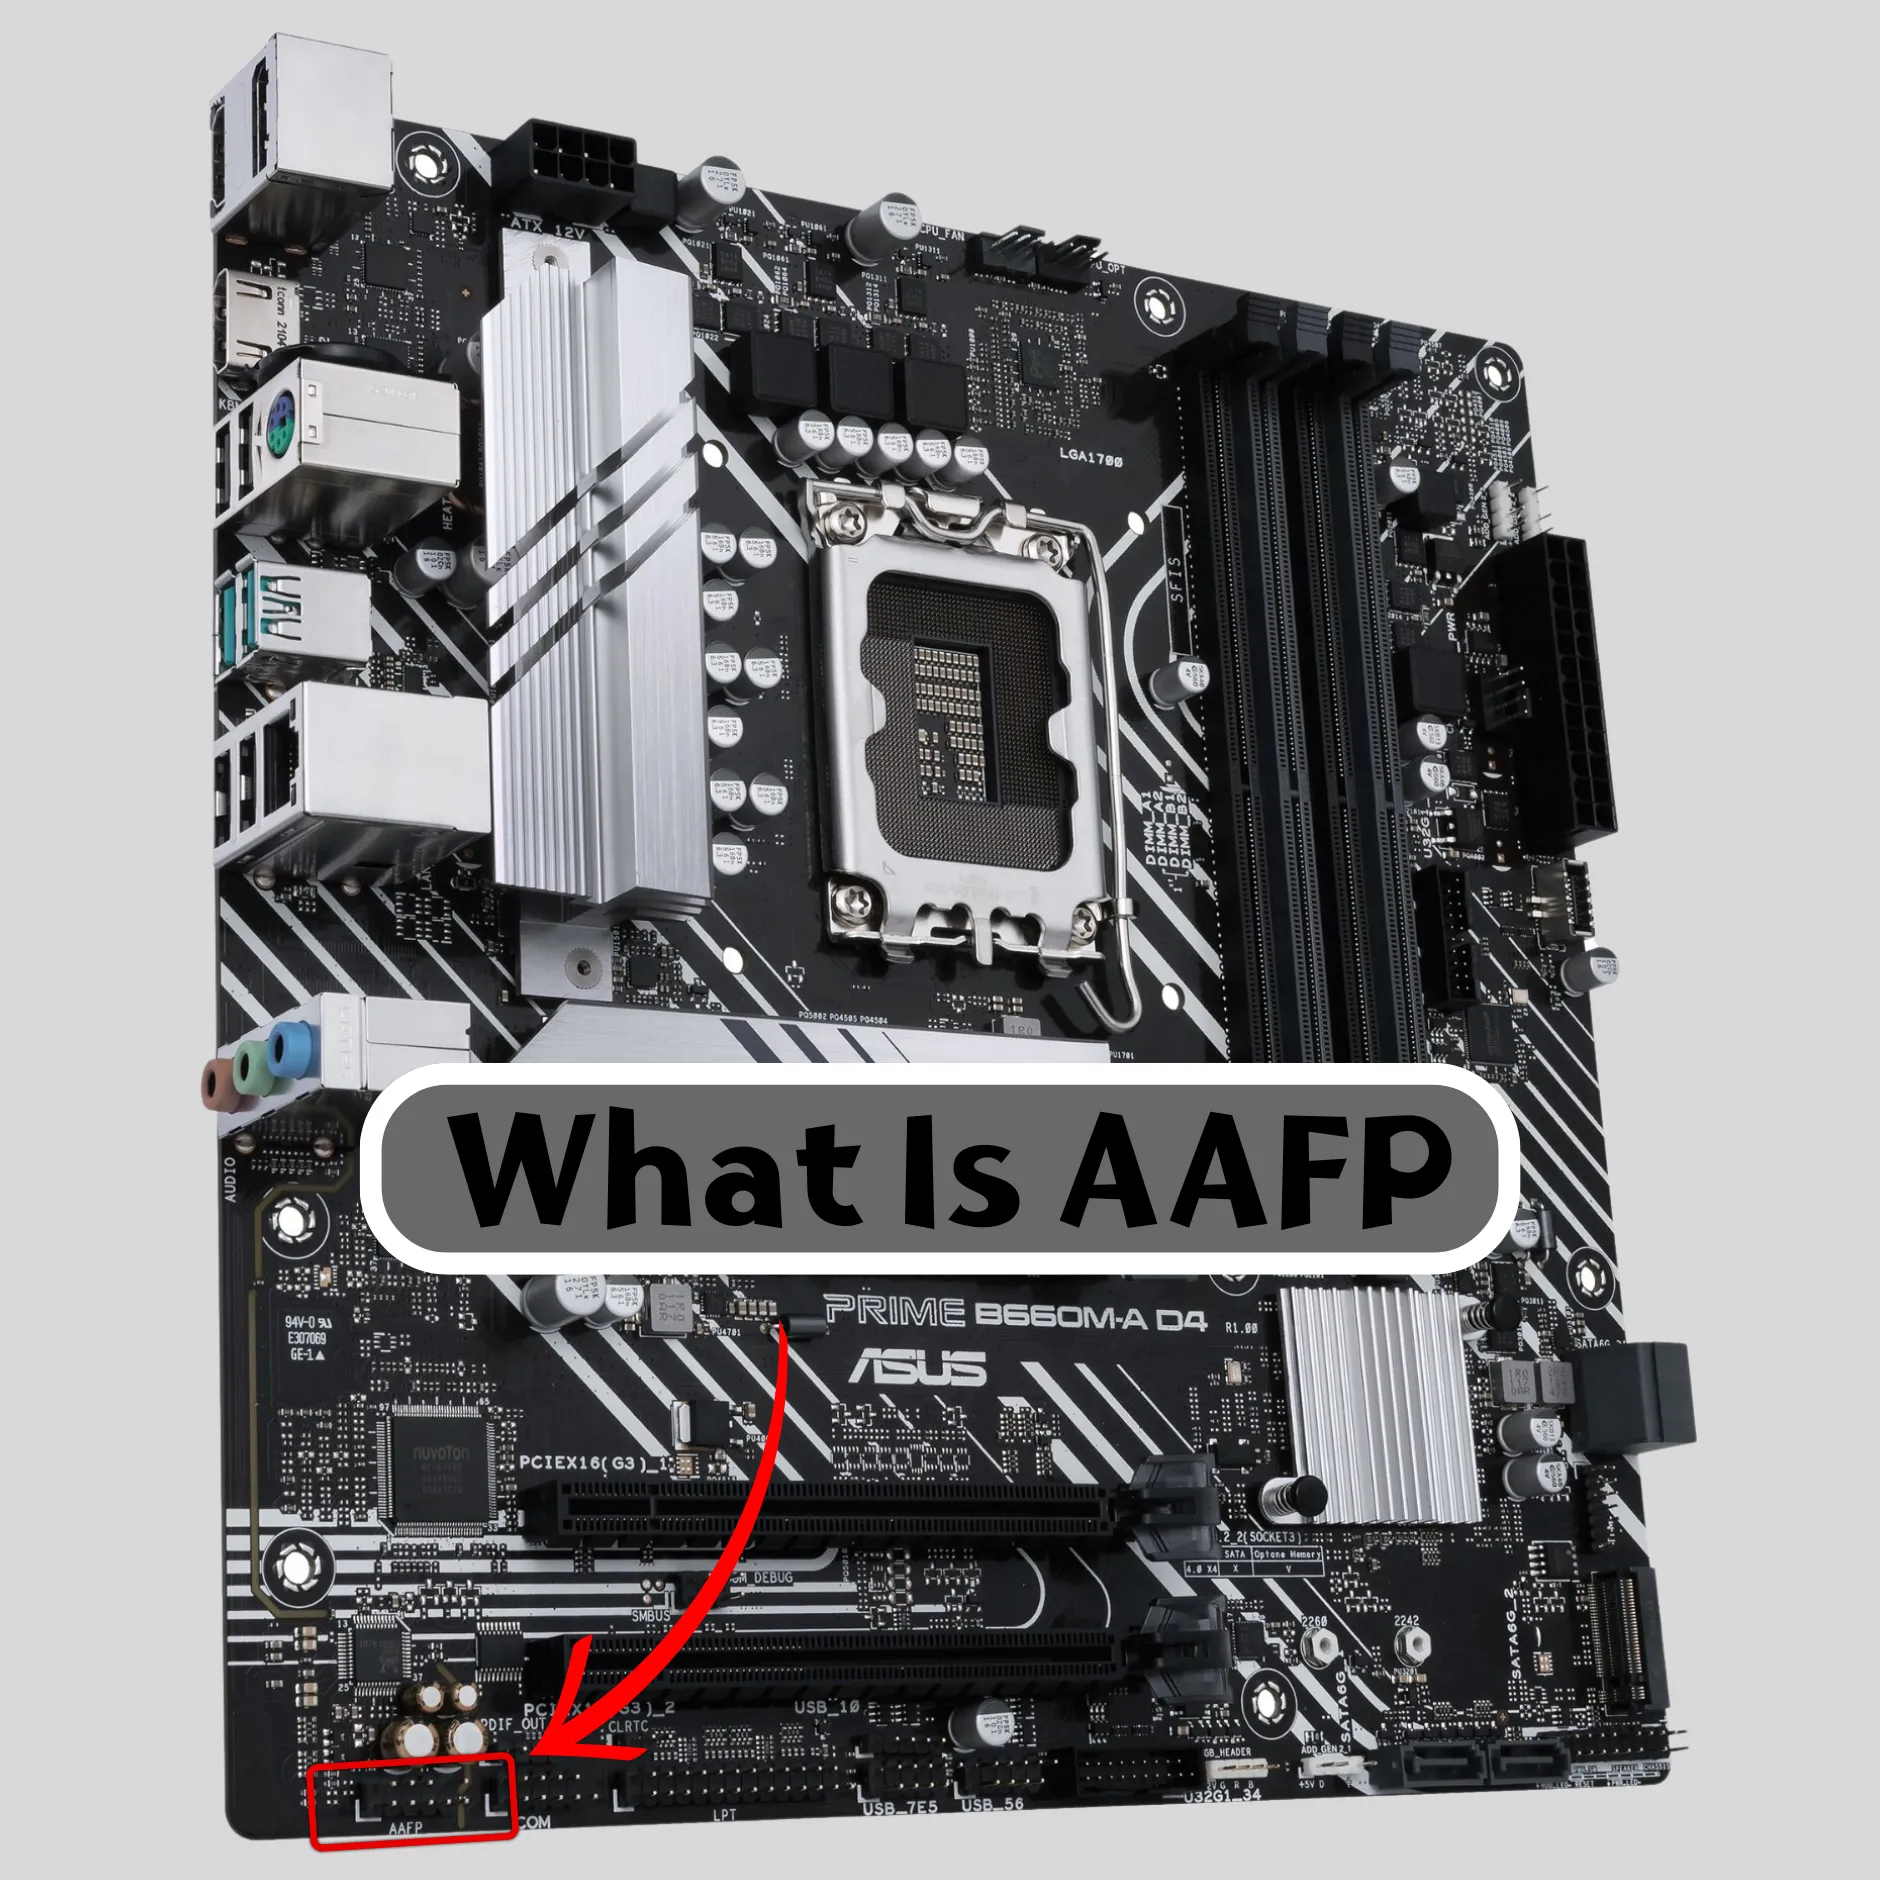 What Is AAFP On Motherboard